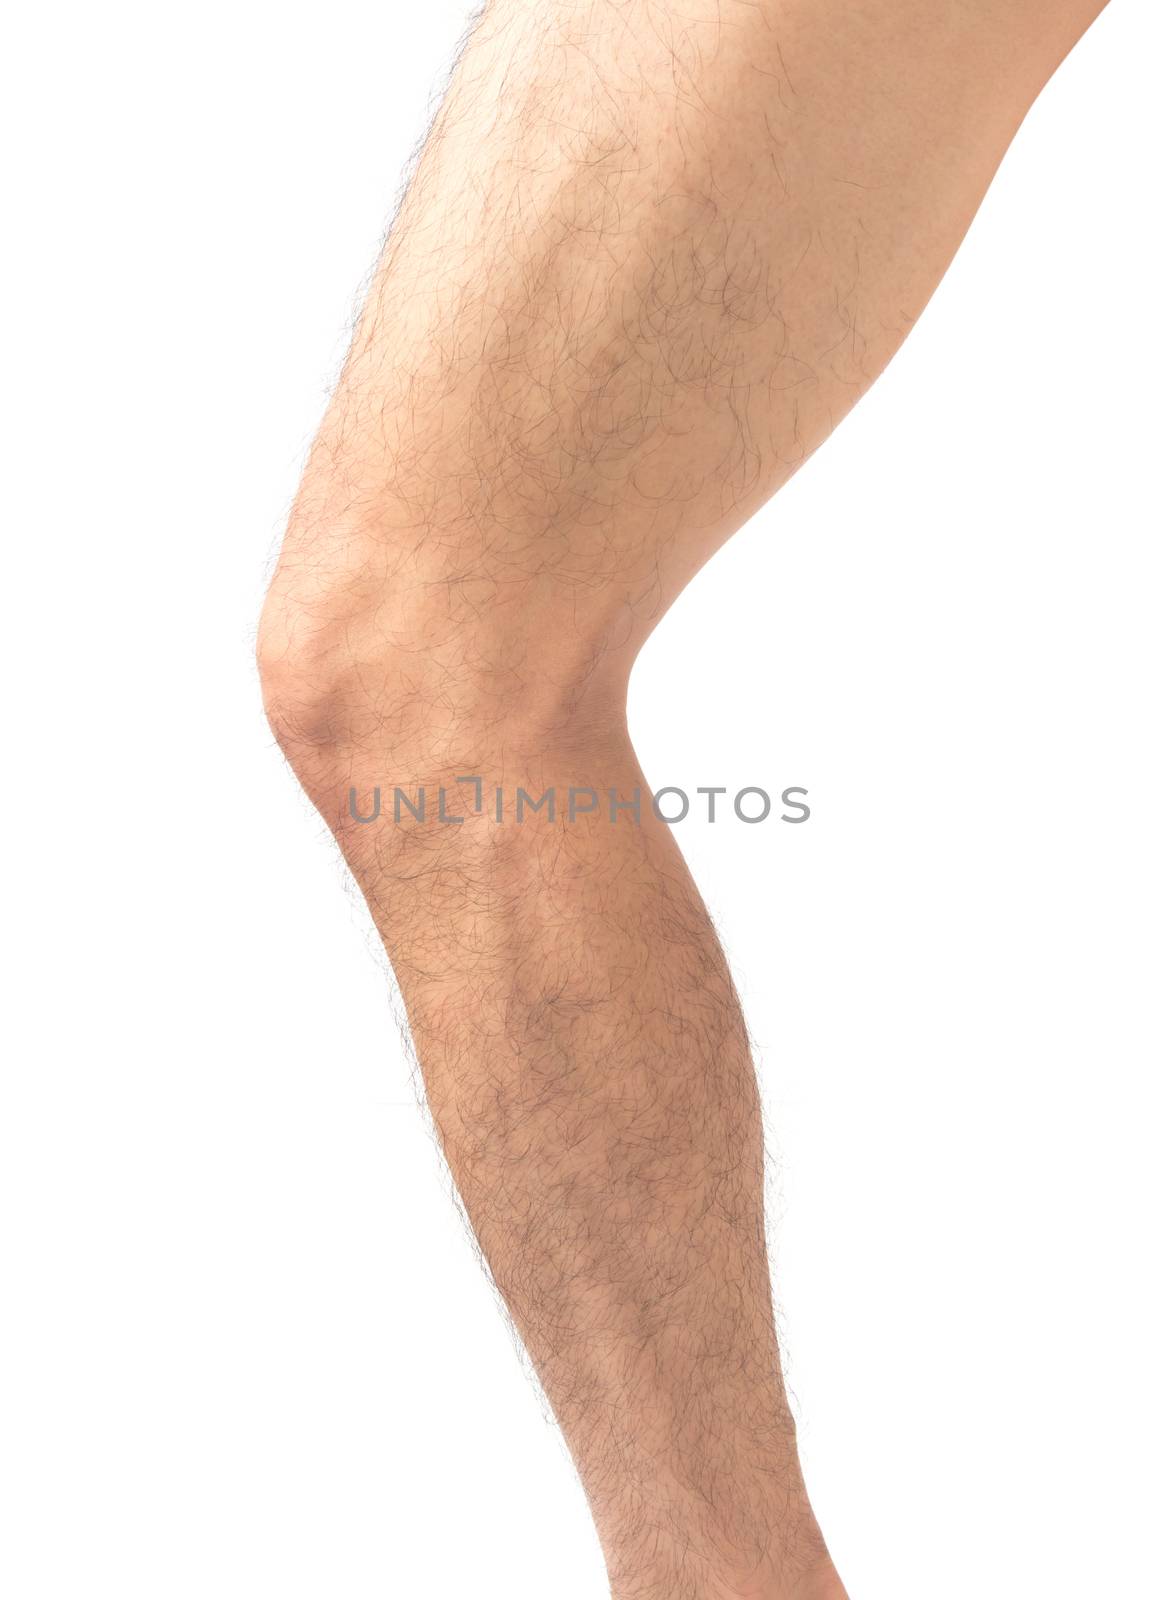 Closeup leg men skin and hairy with white background, health car by pt.pongsak@gmail.com